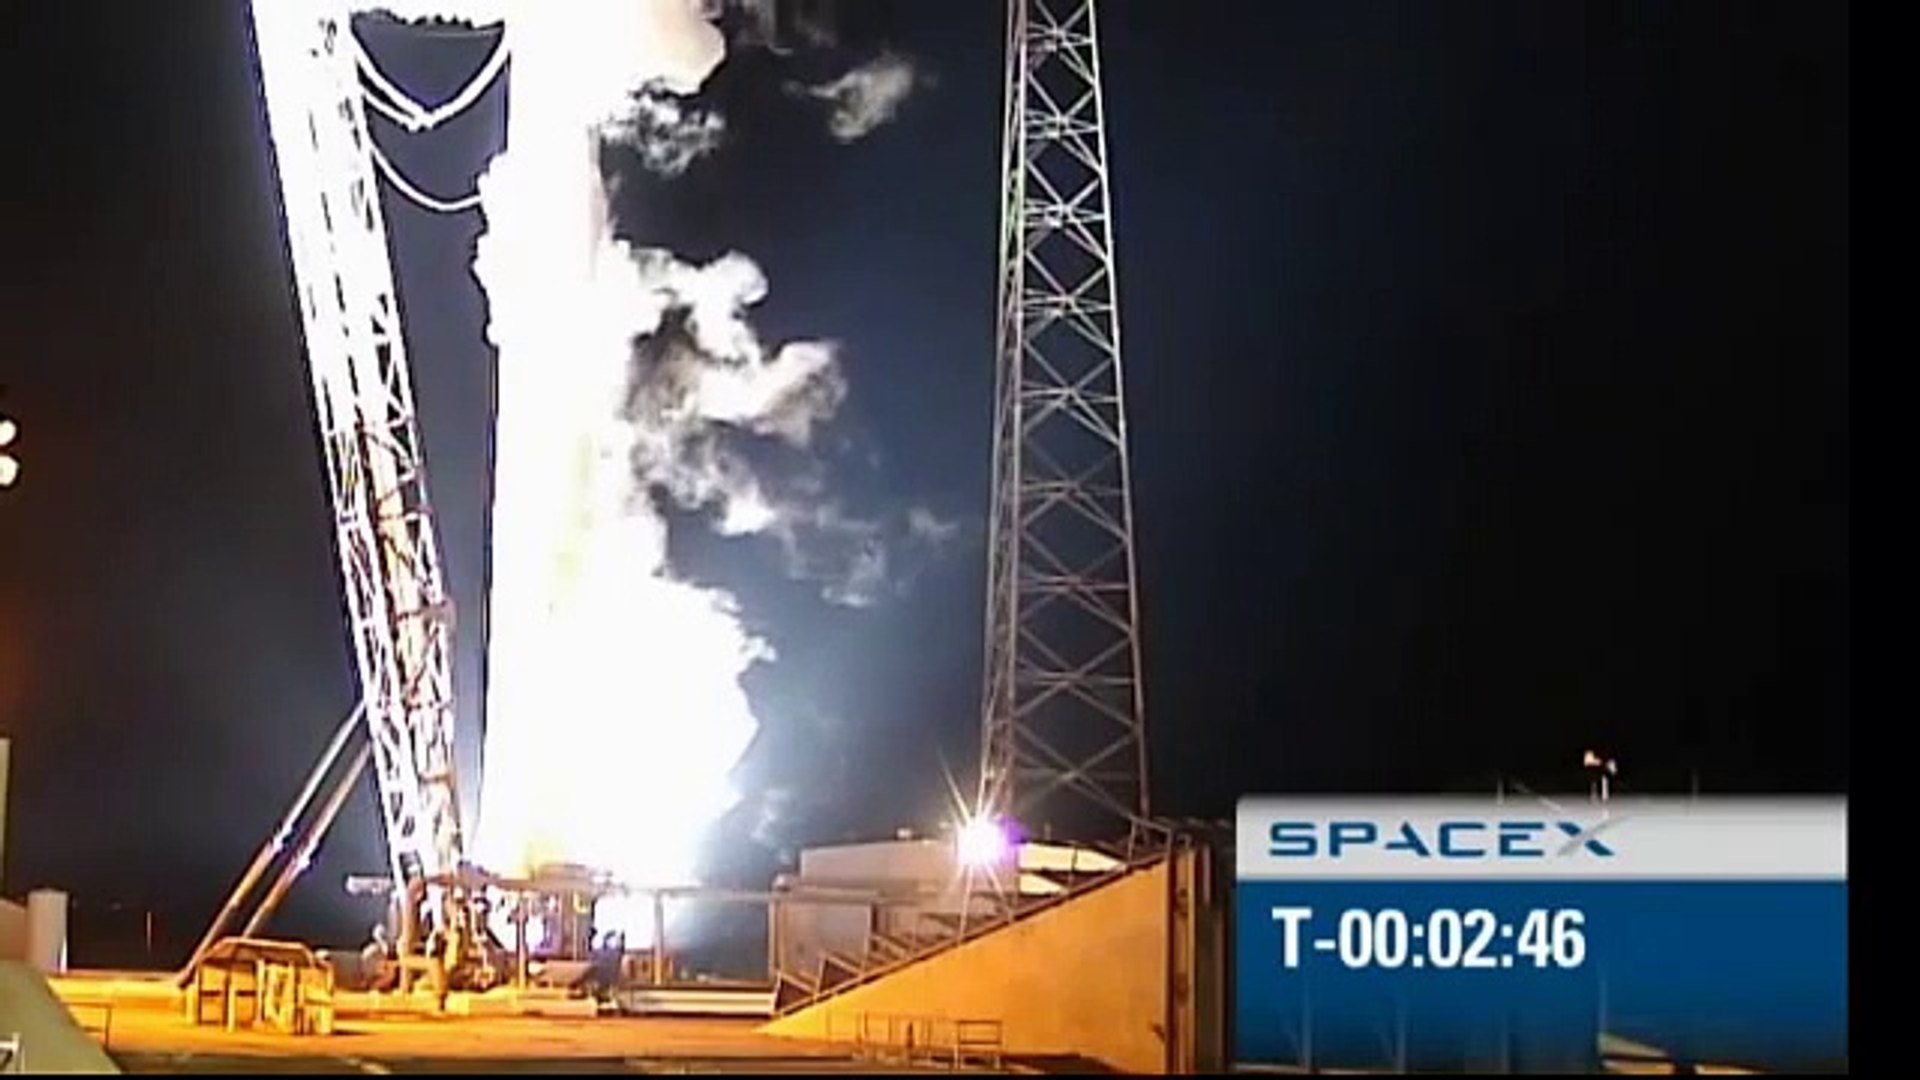 SpaceX launch, May 22, 2012